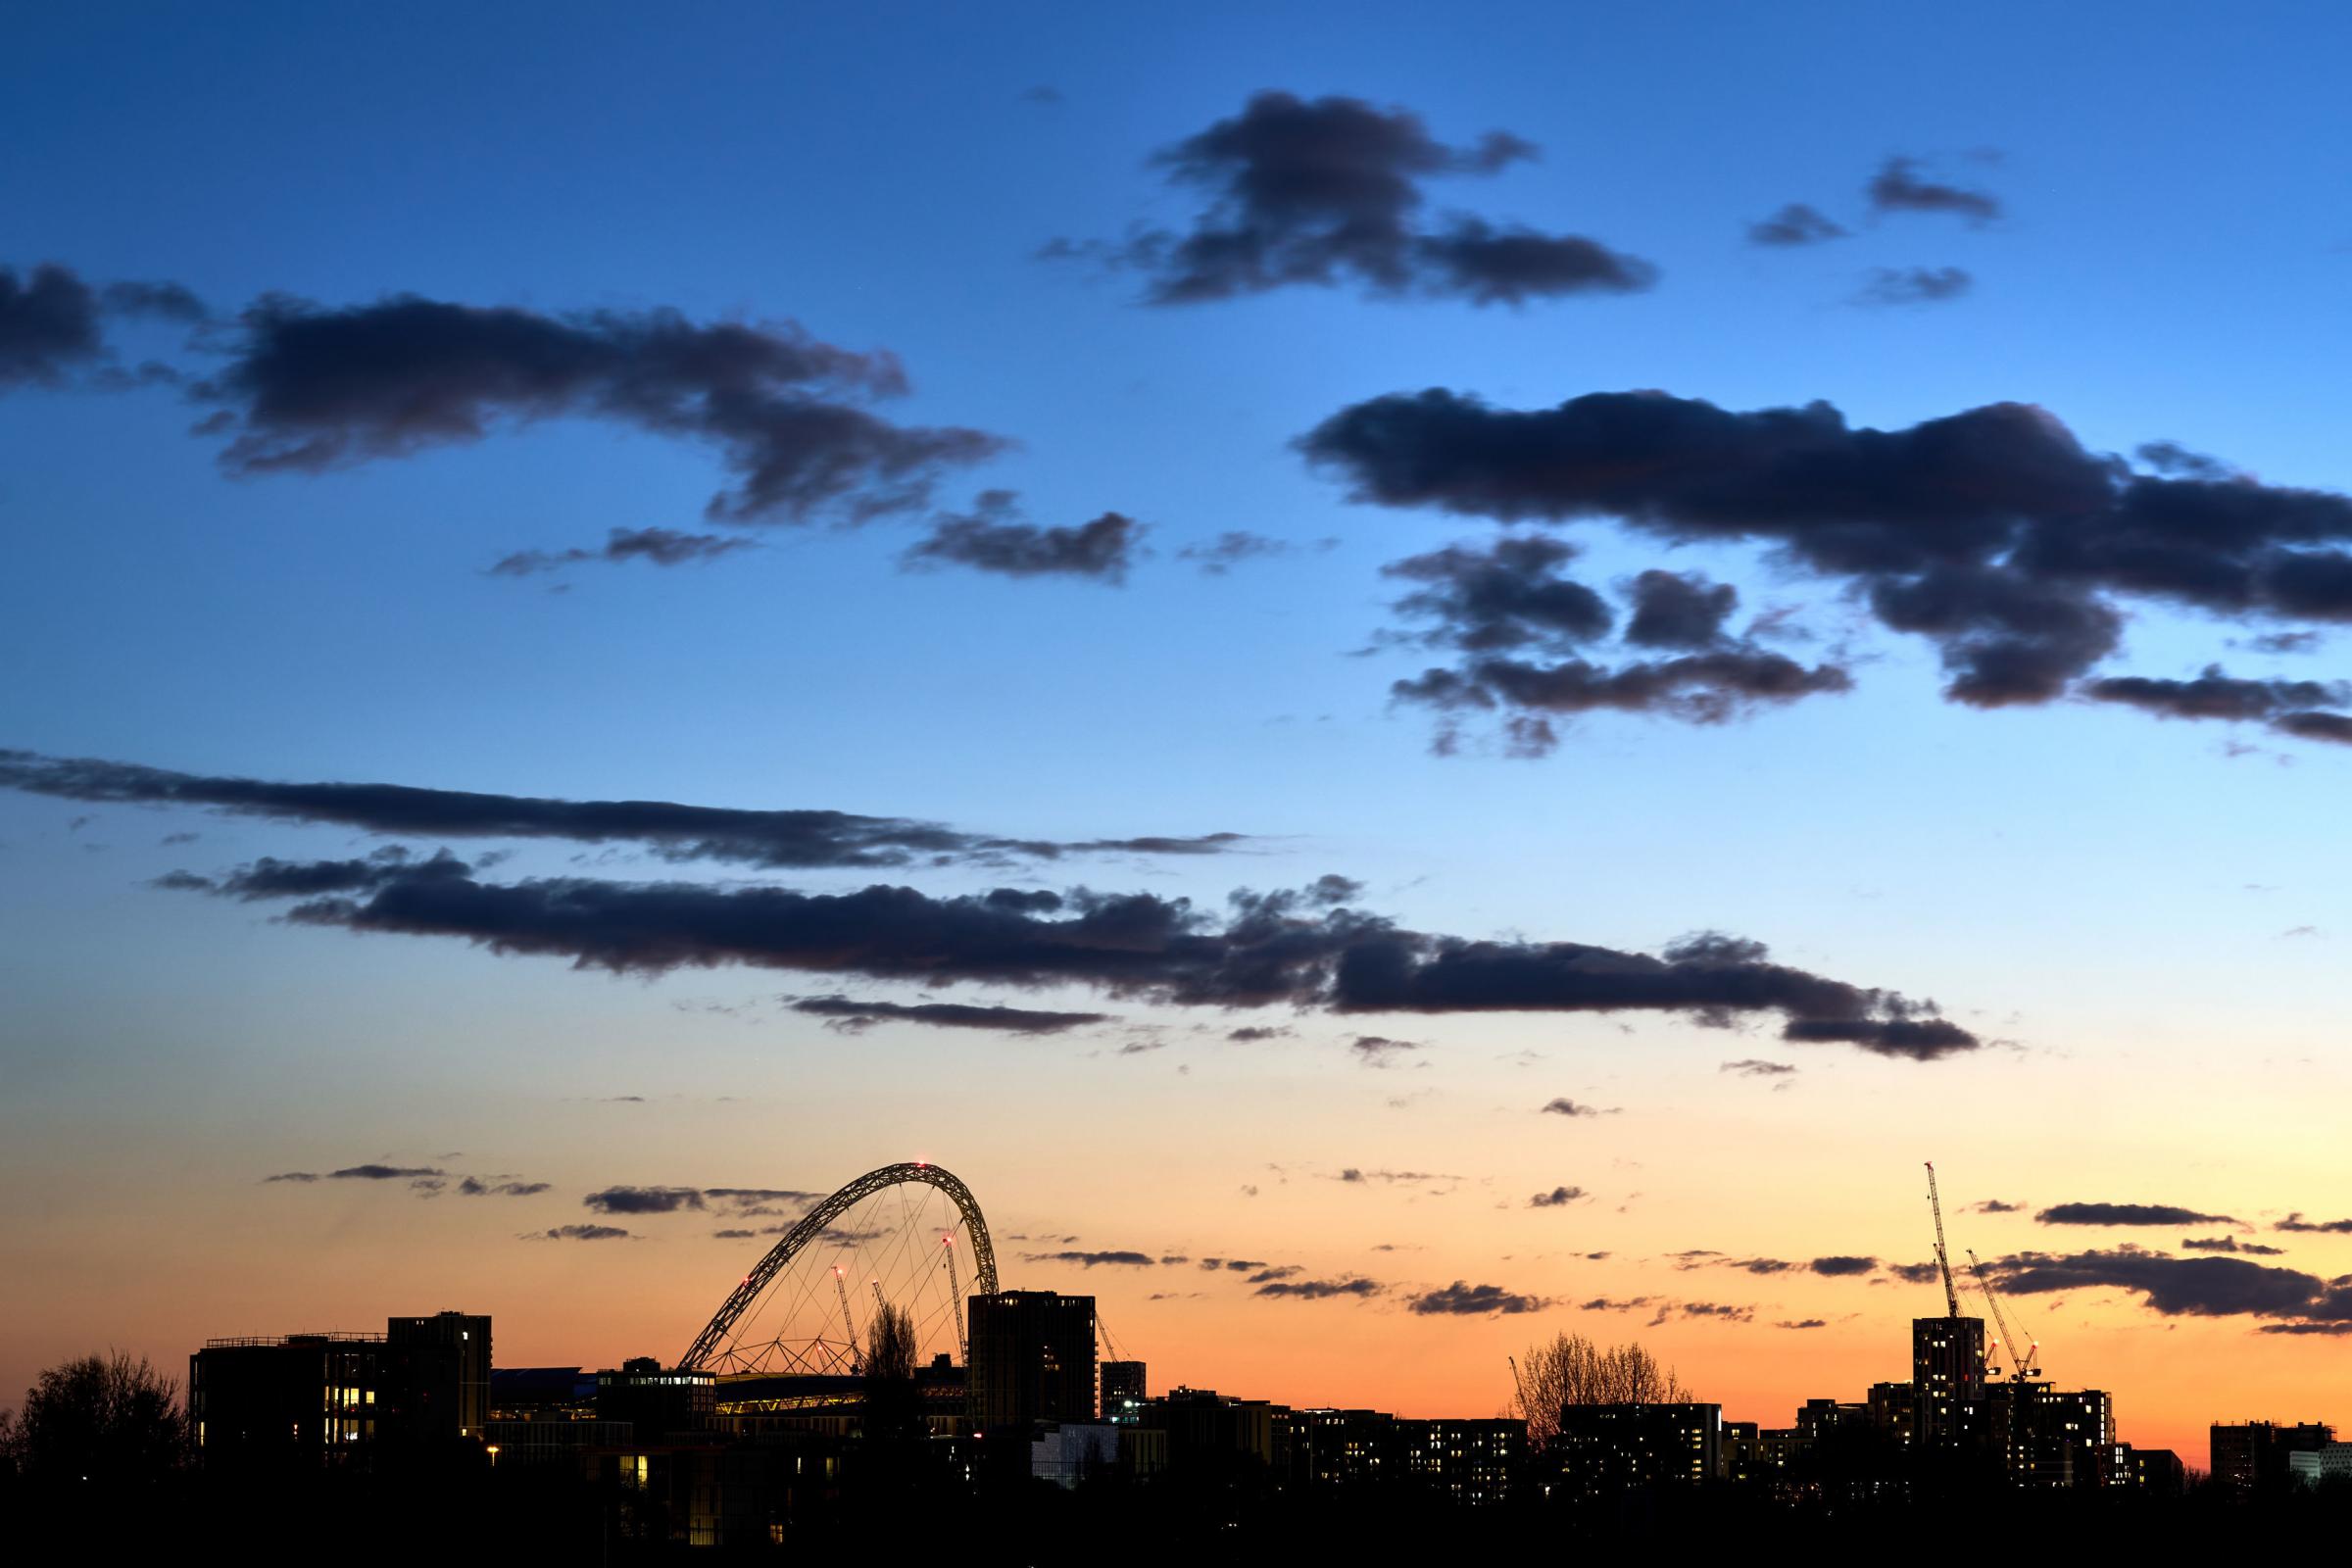 A view of Wembley stadium at sunset in London Picture: JOHN WALTON/PA.